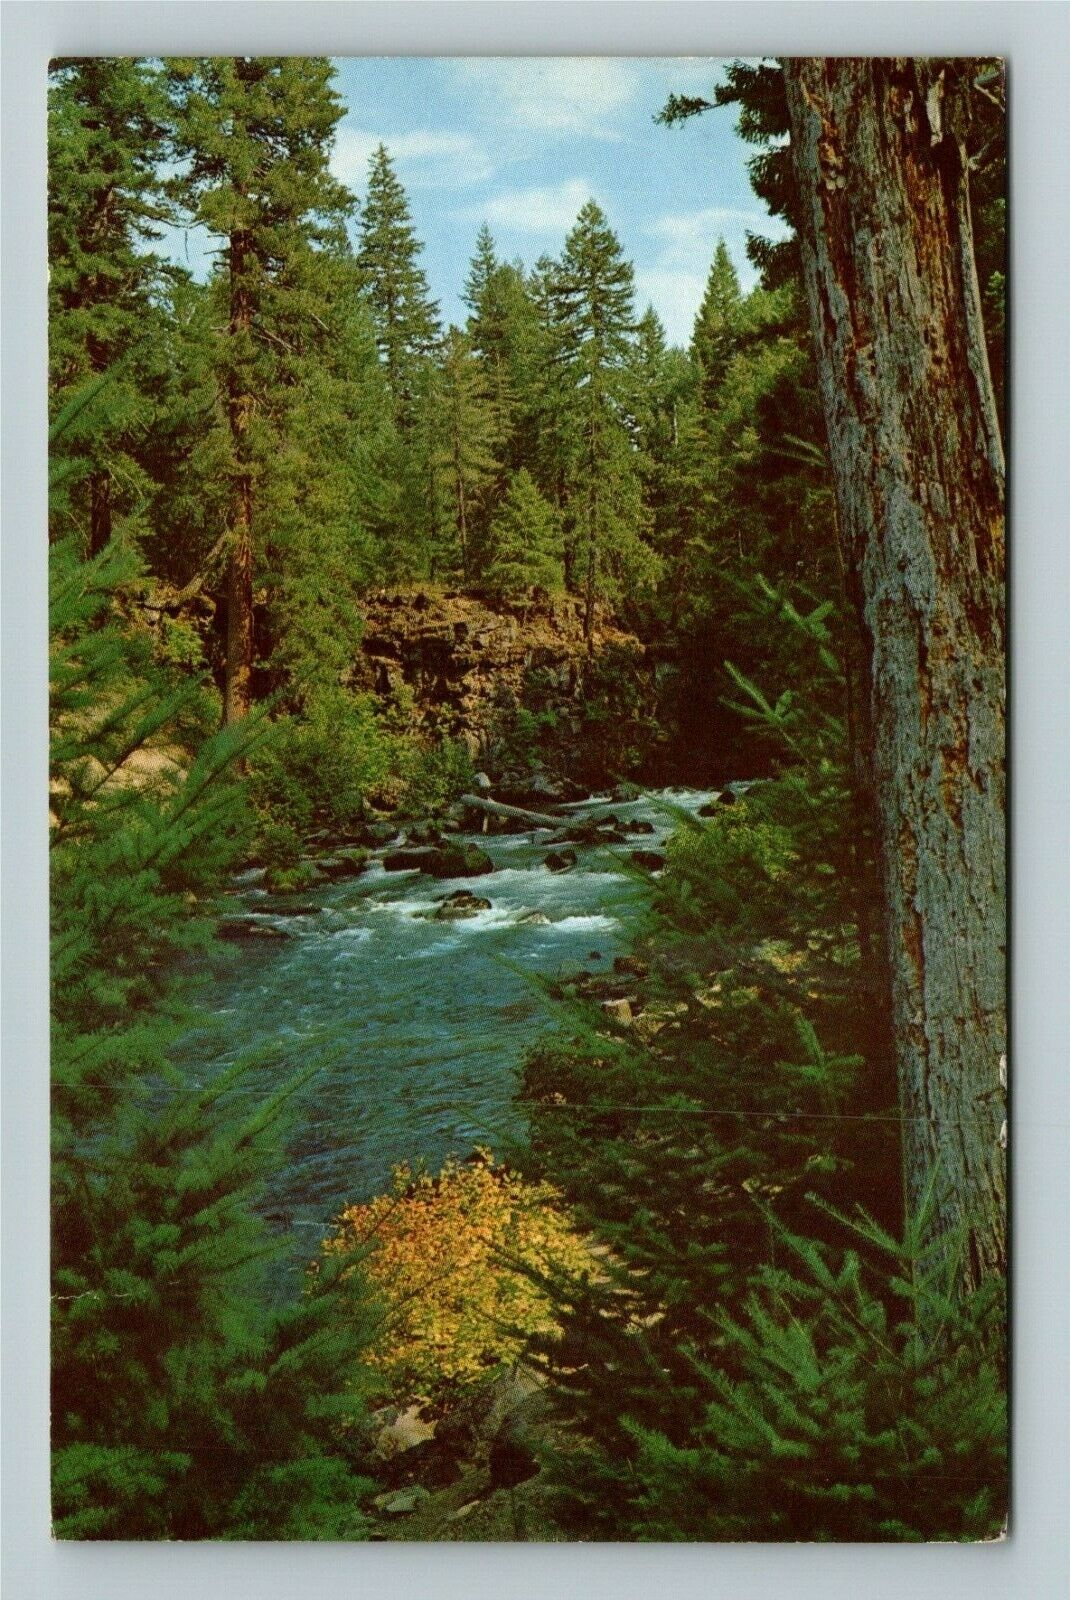 Rogue River OR-Oregon, Scenic River Views and Forest, c1965Postcard